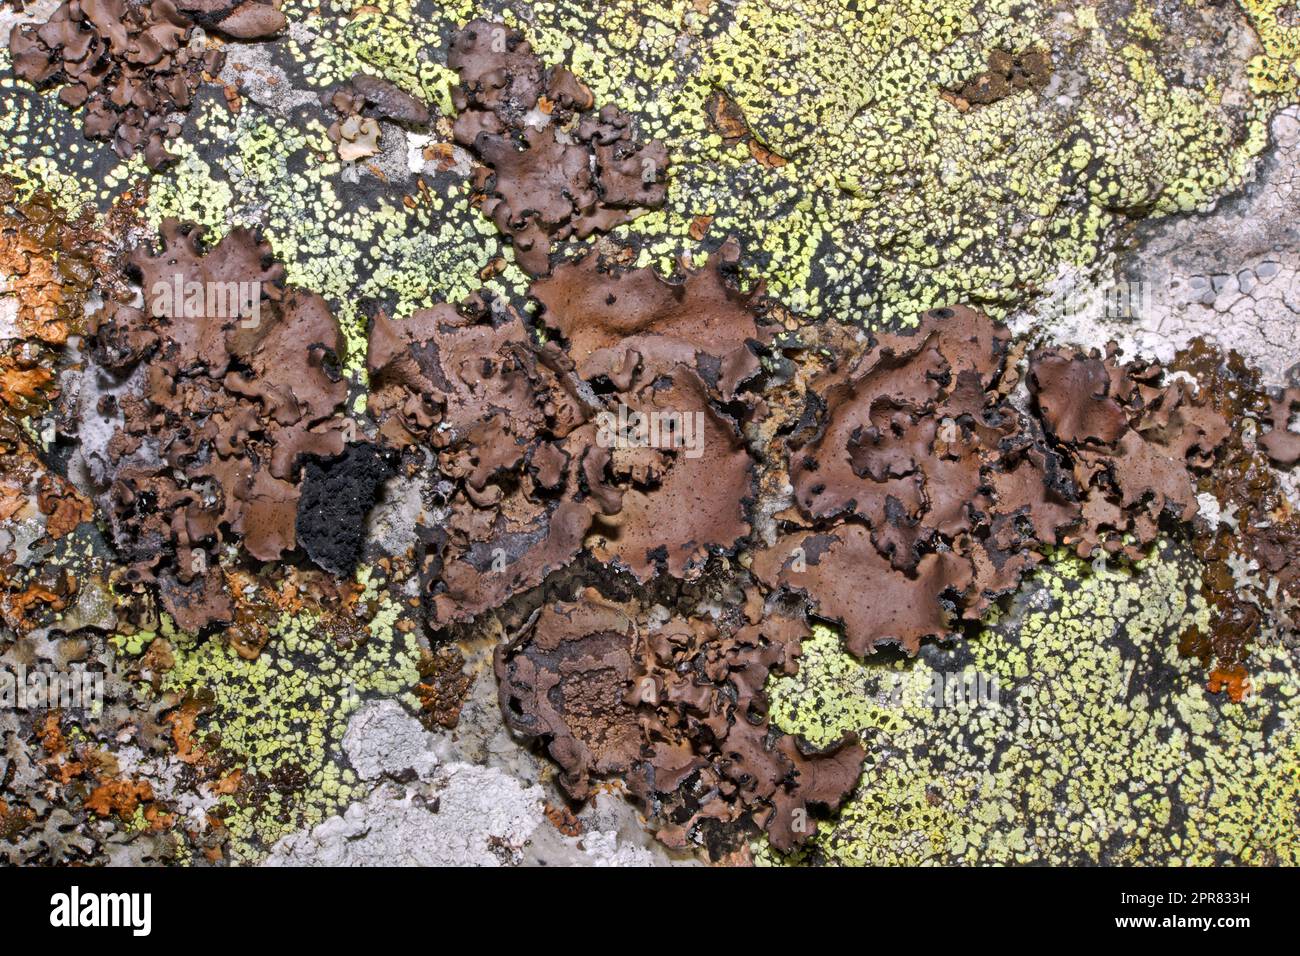 Umbilicaria polyrrhiza is a foliose lichen found on exposed siliceous rocks  in hills and mountains. It occurs in Europe, Asia and North America. Stock Photo